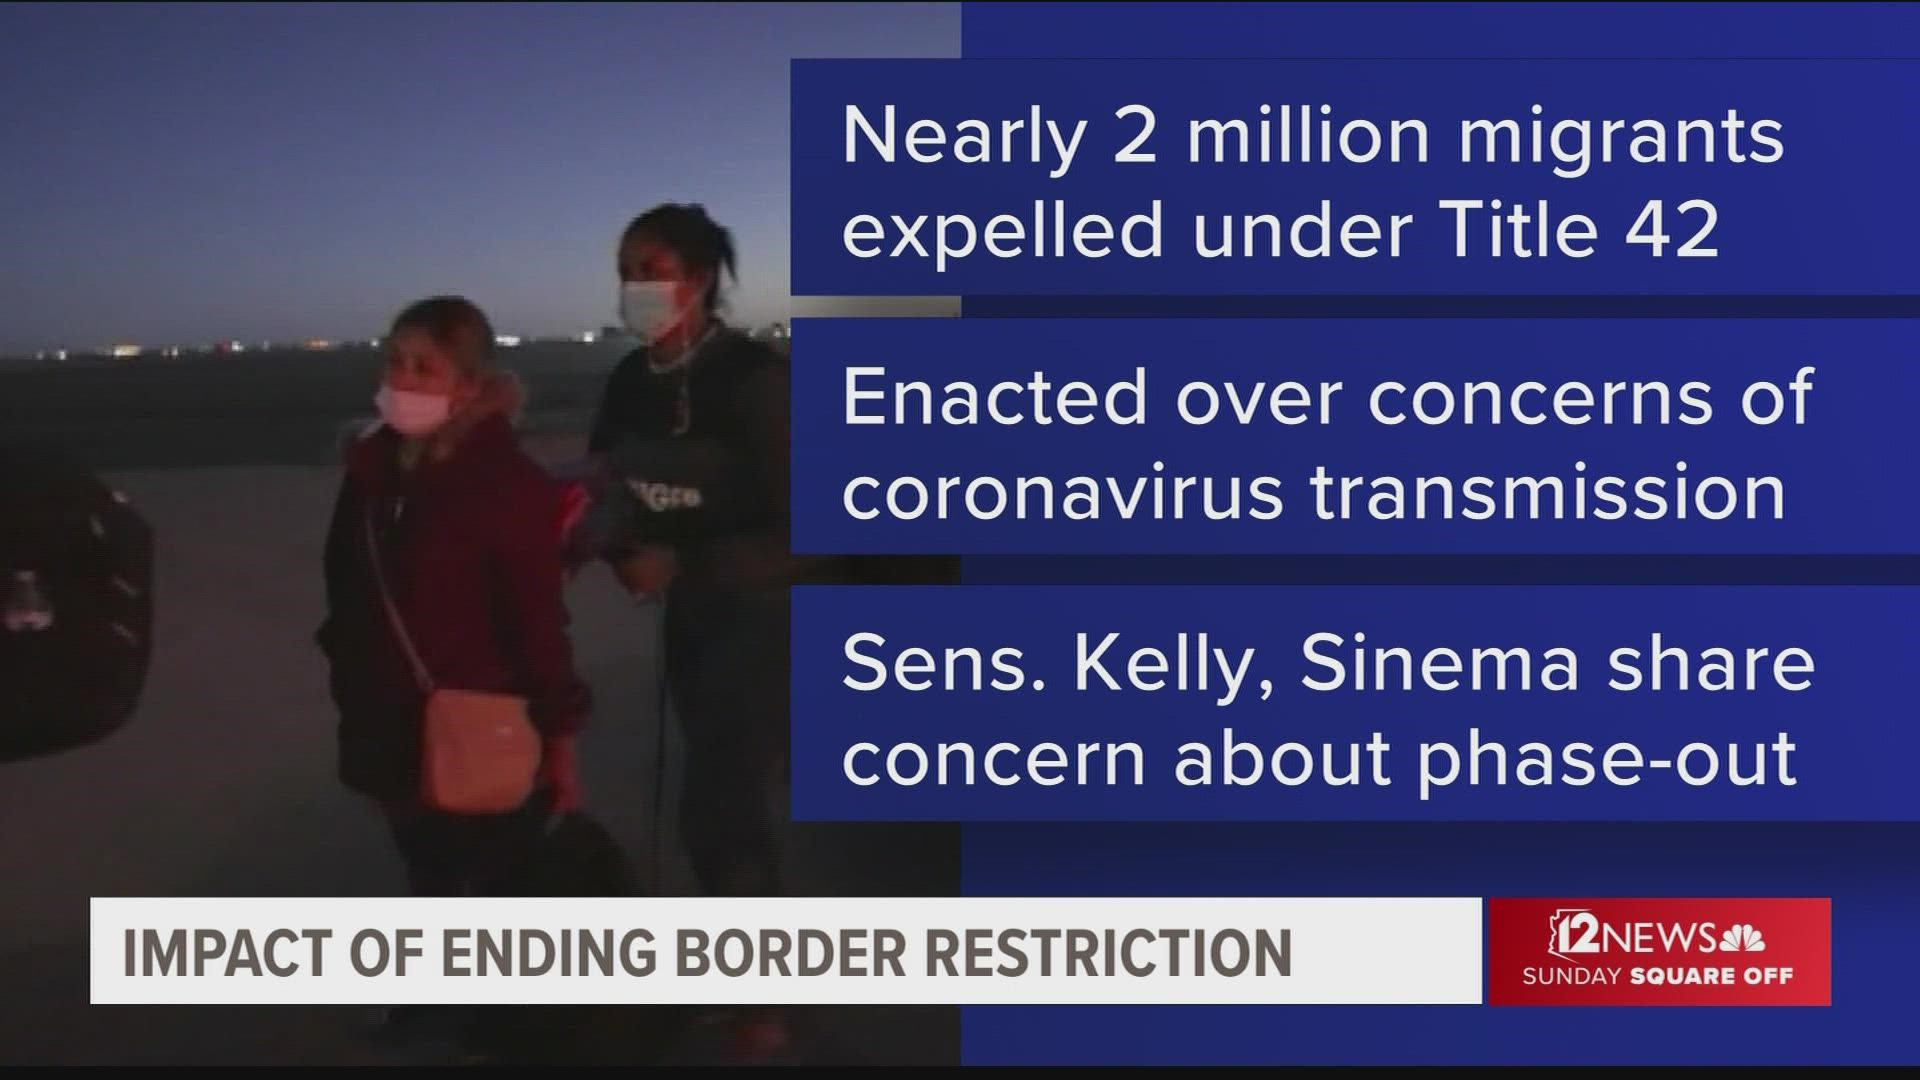 The end of a federal health rule that allows for immediate deportations at the border has serious implications